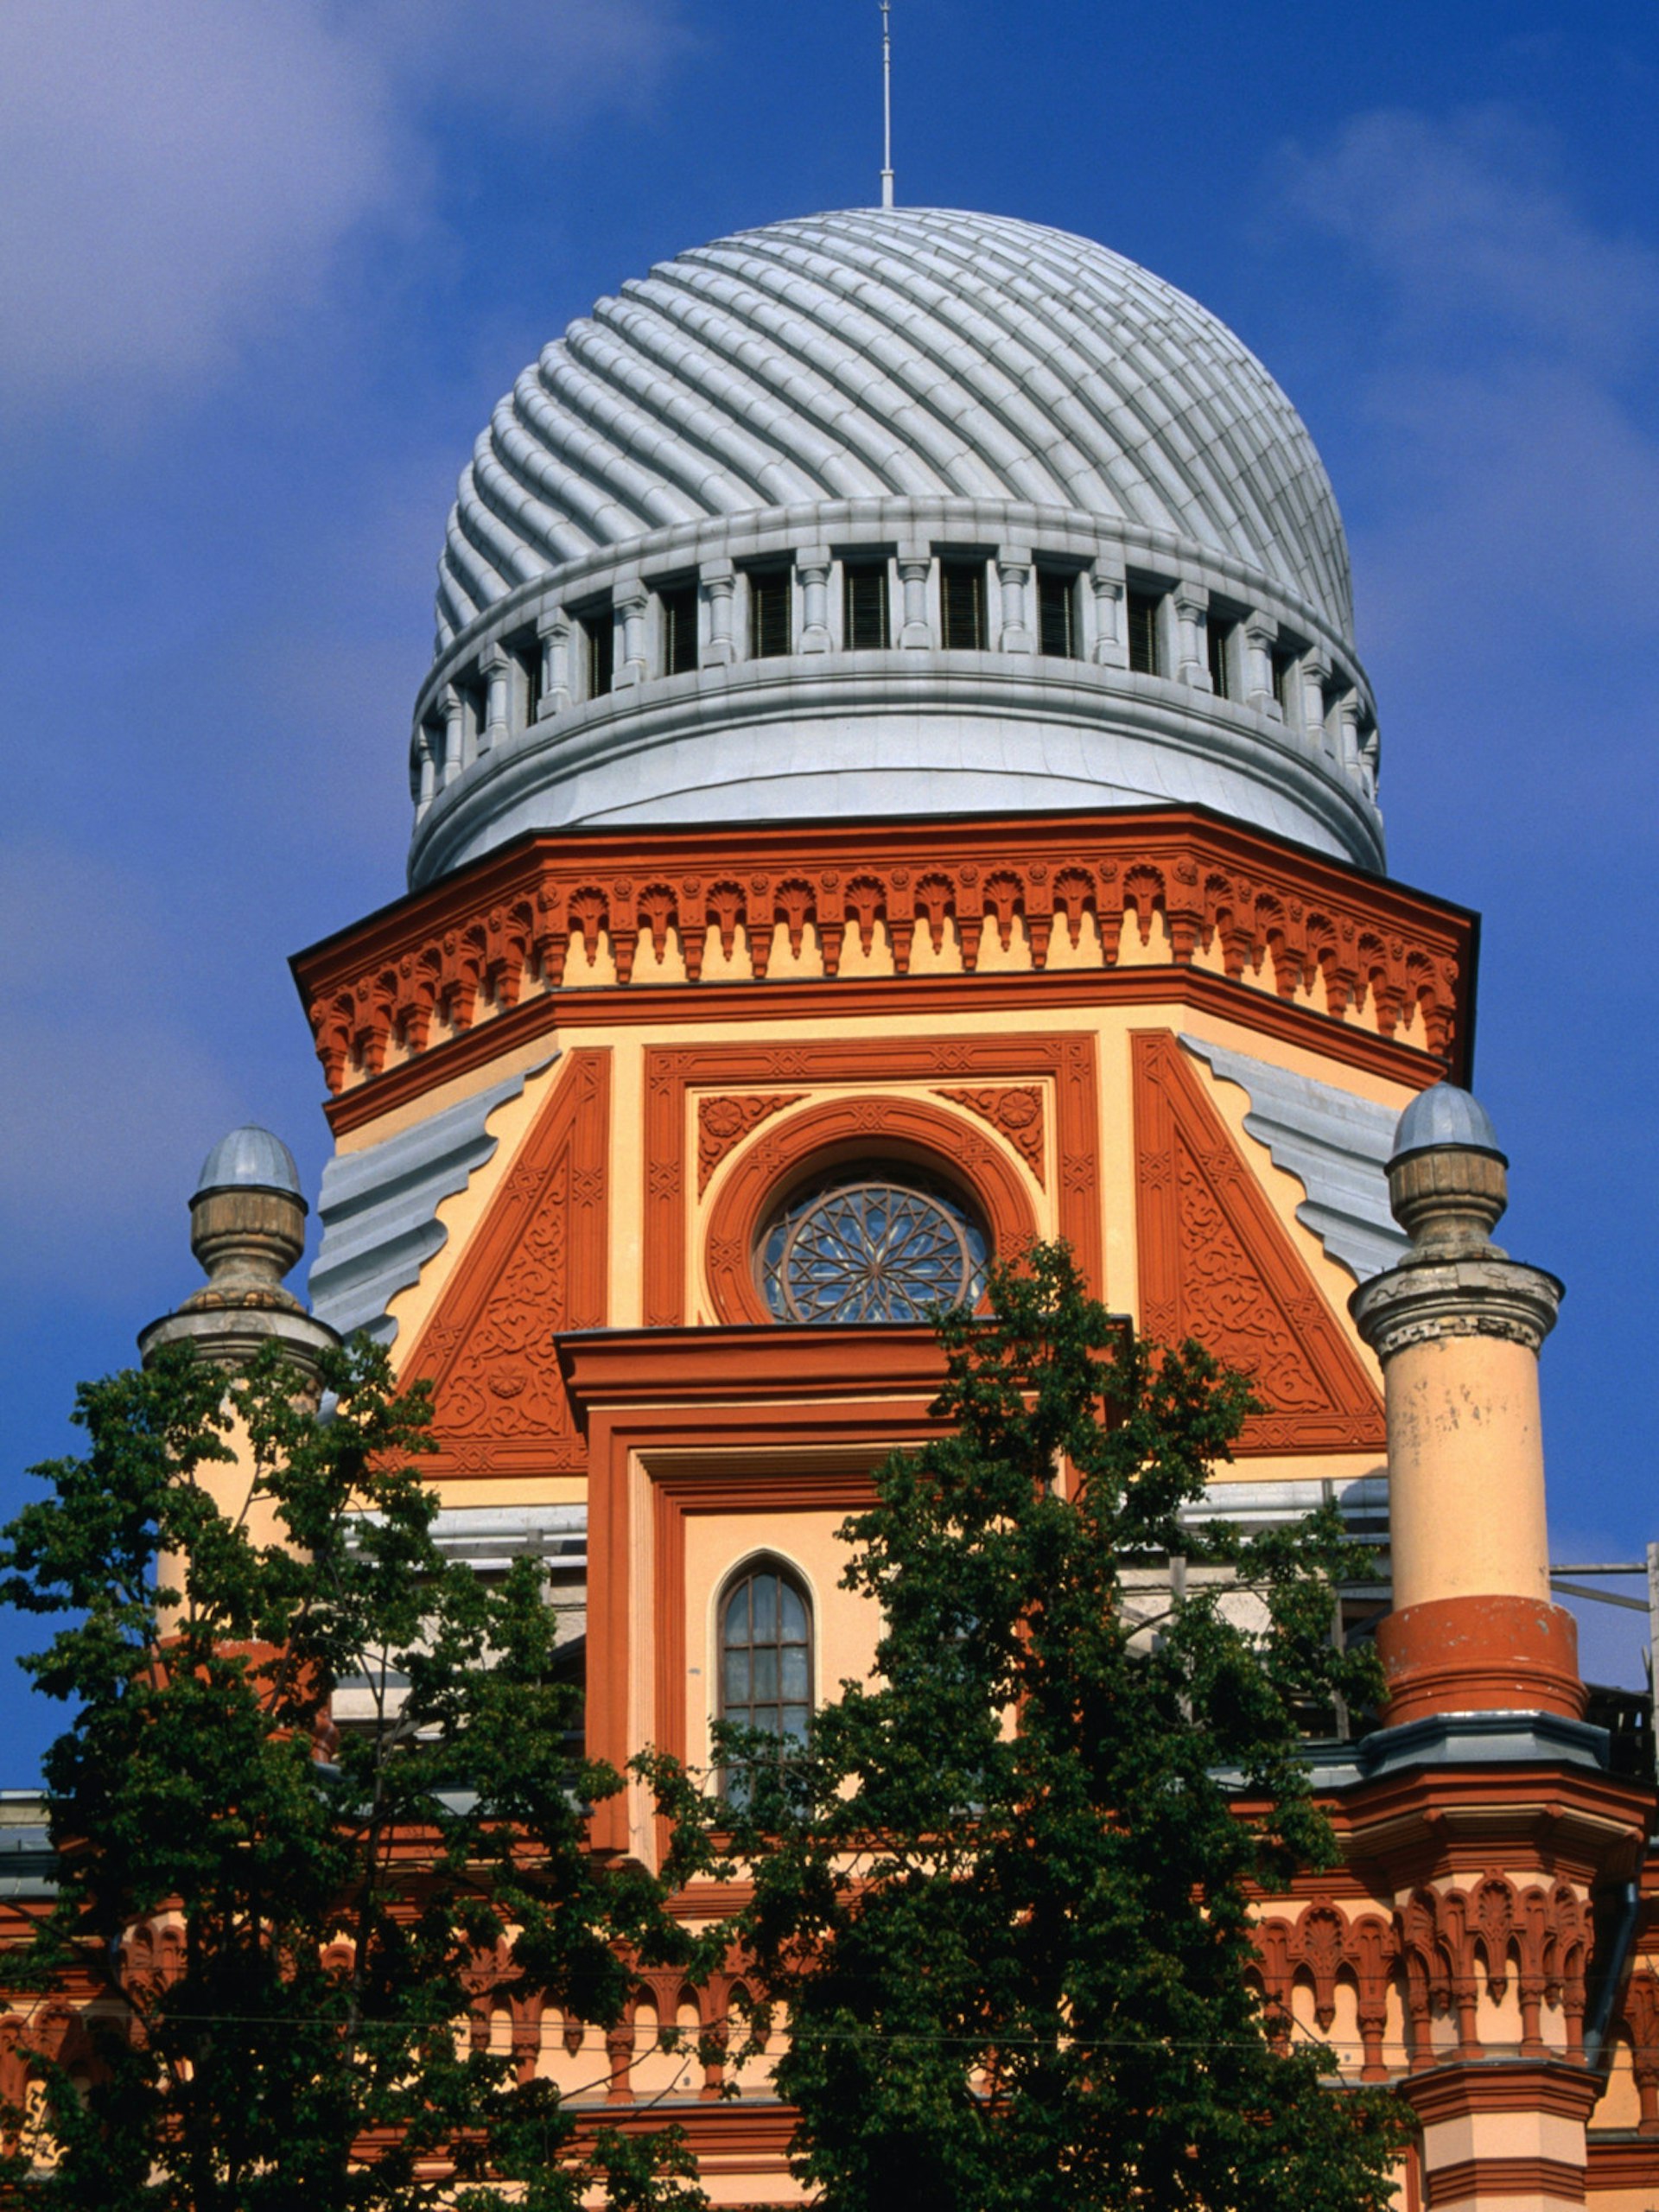 St Petersburg's Grand Choral Synagogue features Moorish architectural elements © Jonathan Smith / Lonely Planet